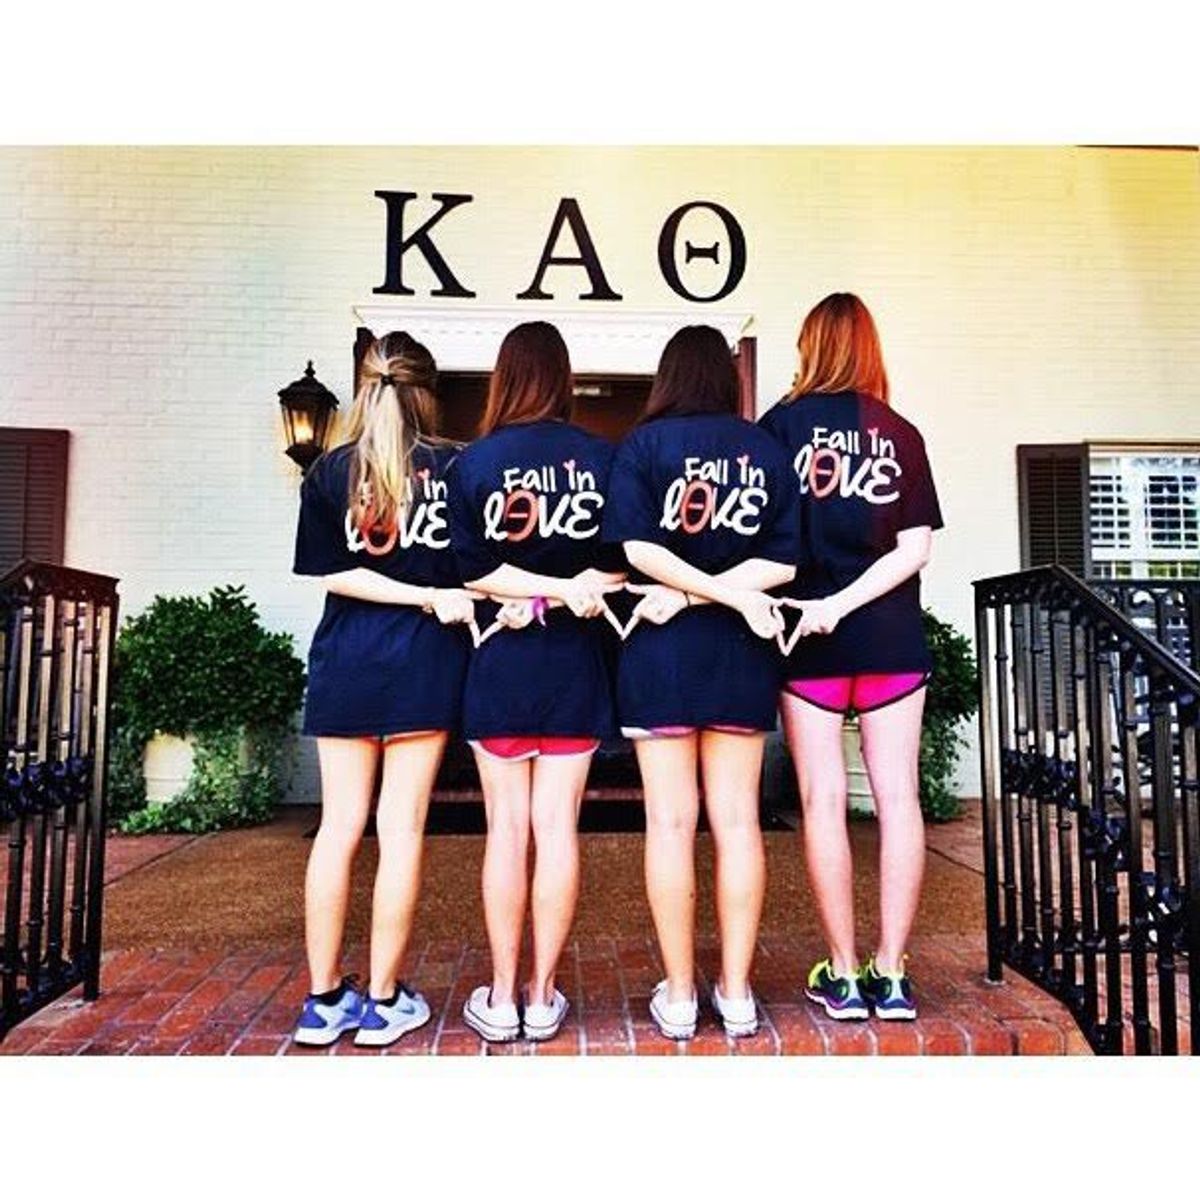 What I've Learned From My Sorority